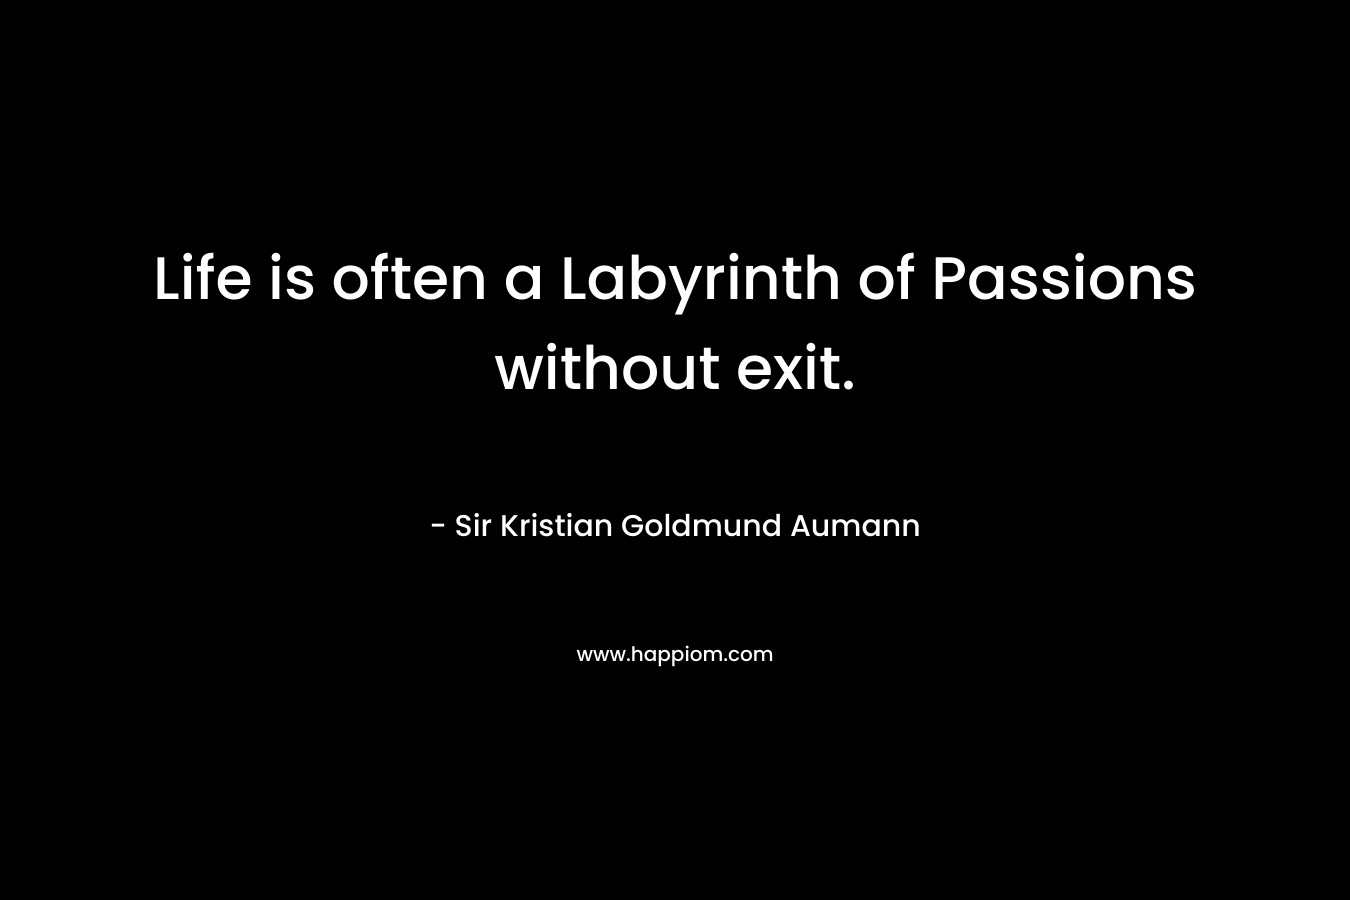 Life is often a Labyrinth of Passions without exit. – Sir Kristian Goldmund Aumann